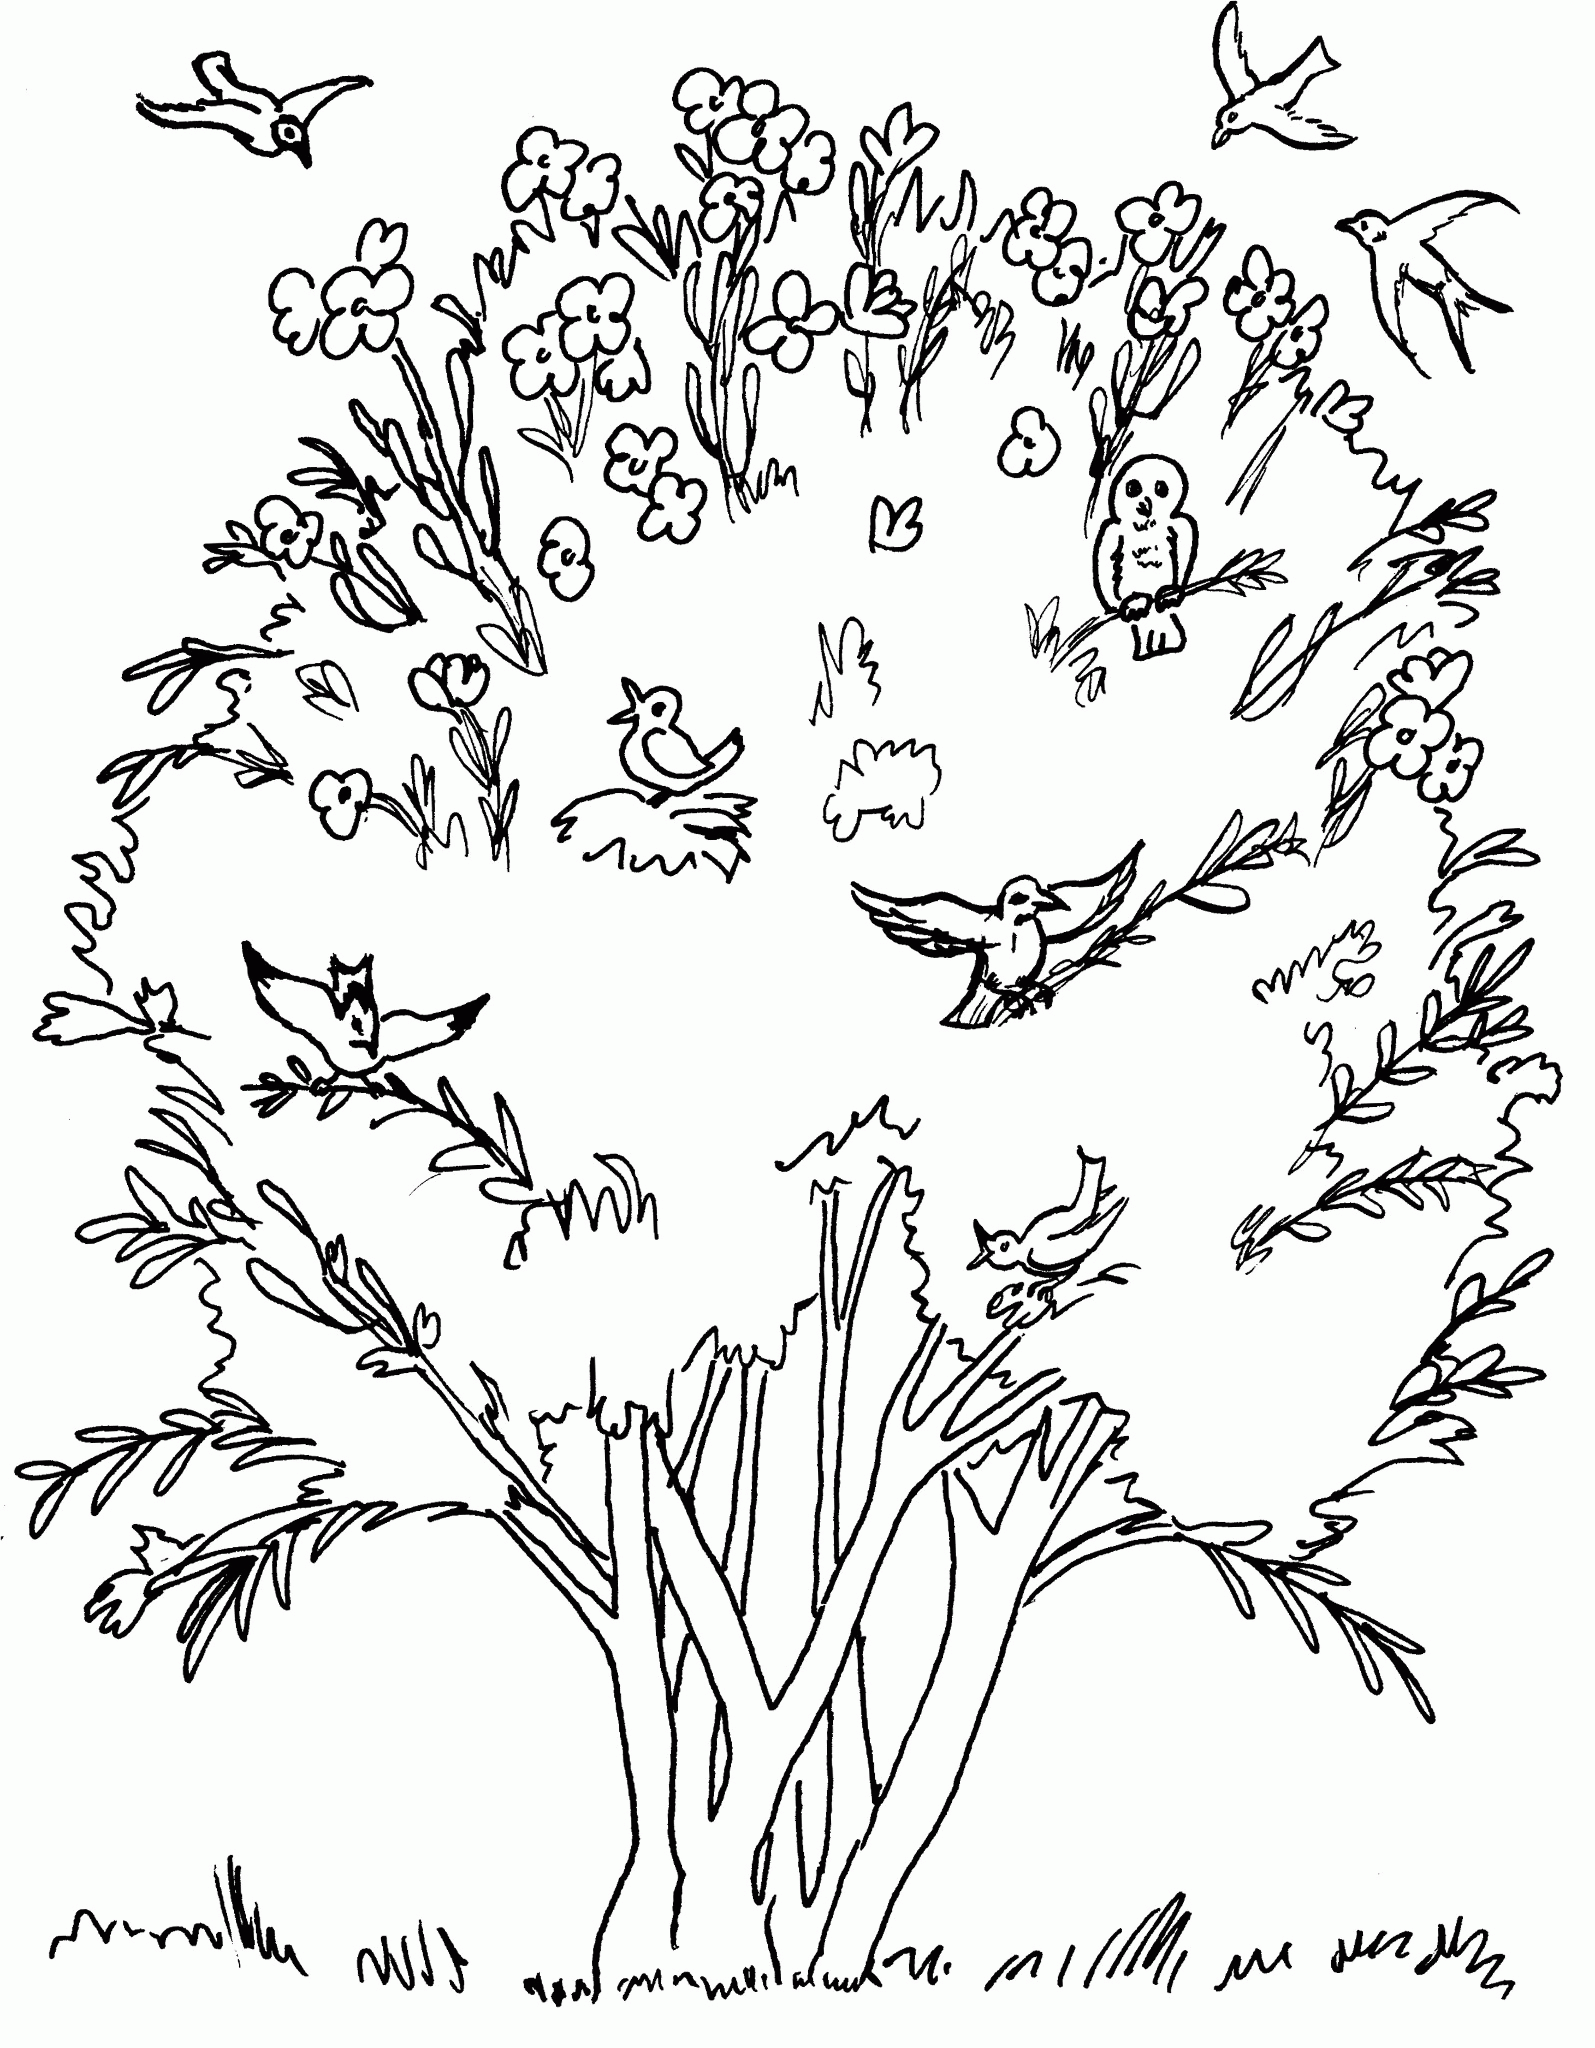 Good Shepherd And Lost Sheep Parable Coloring Pages - Clipart Kid